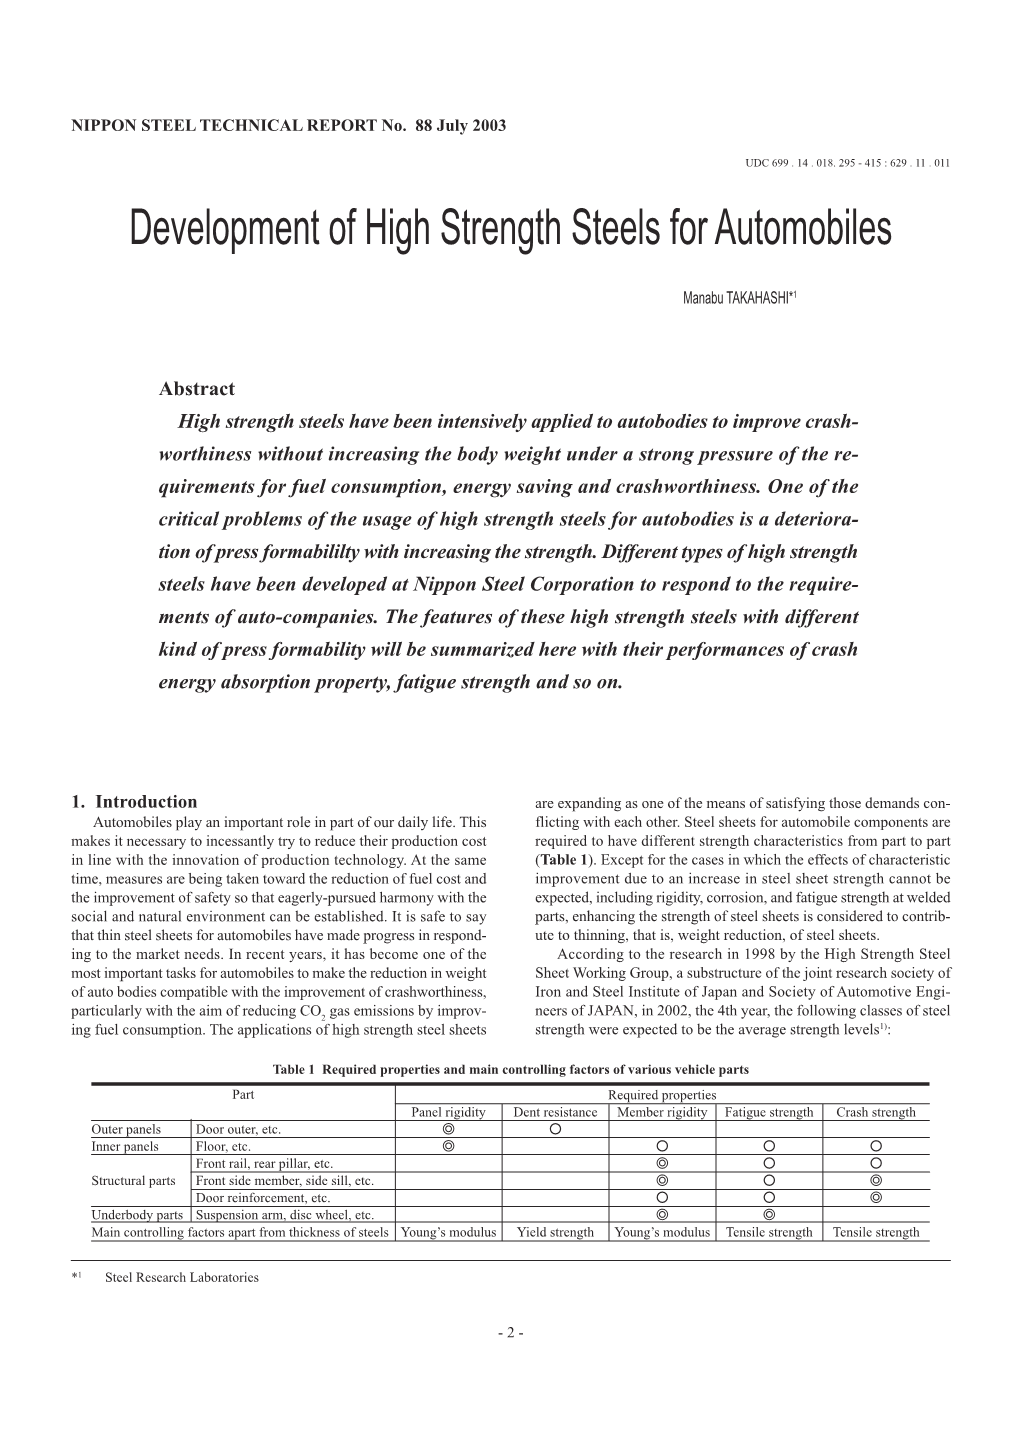 Development of High Strength Steels for Automobiles